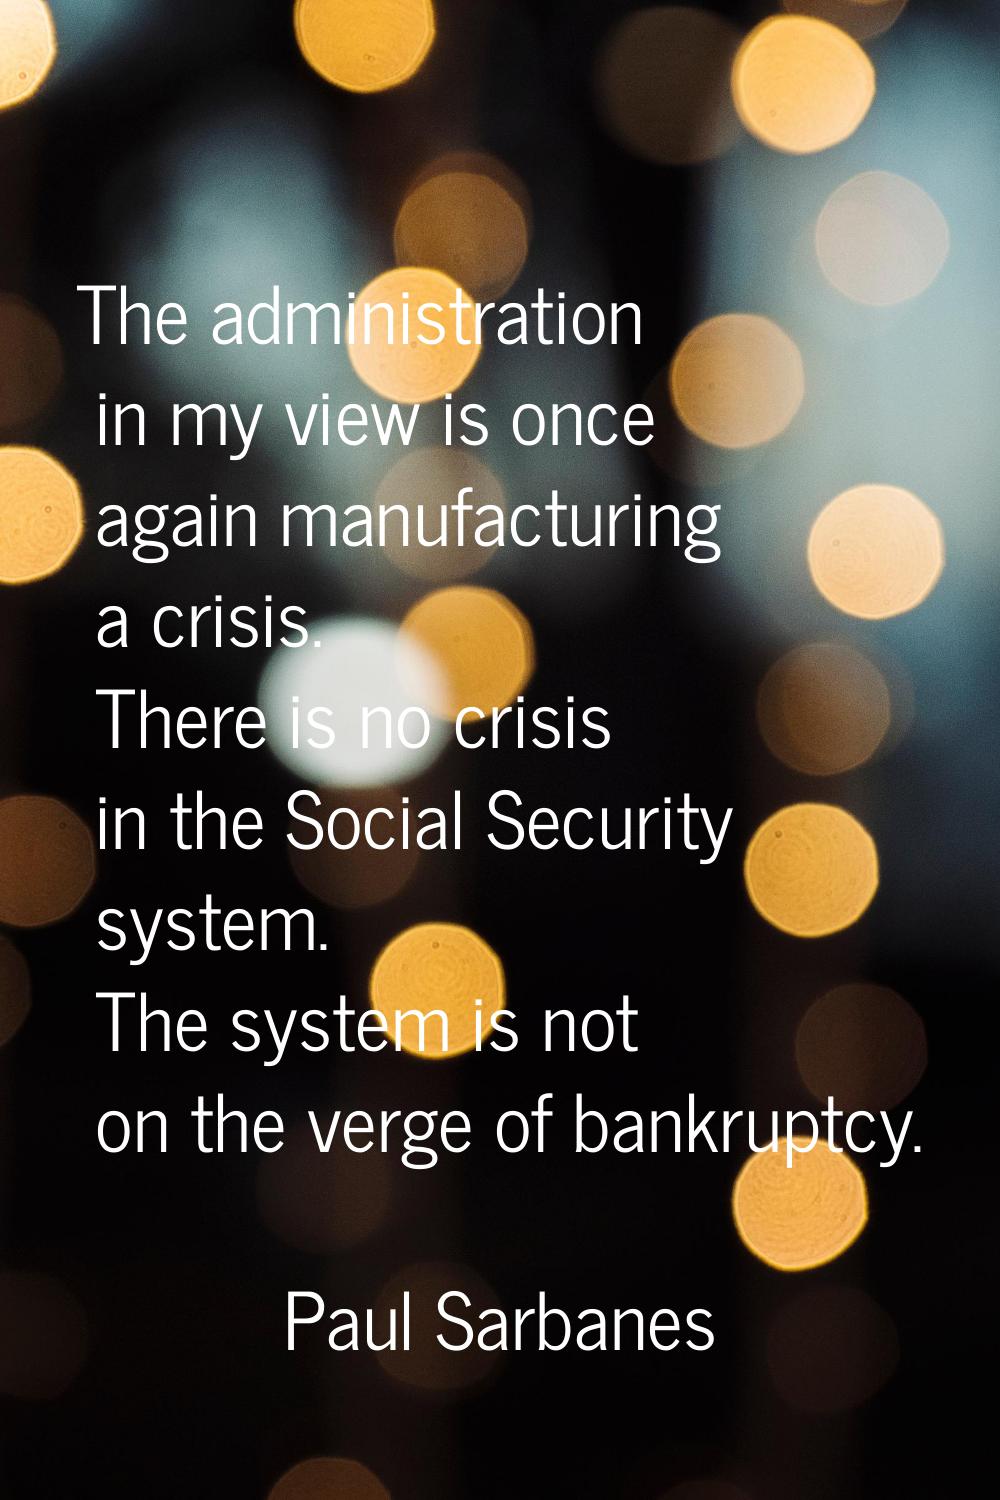 The administration in my view is once again manufacturing a crisis. There is no crisis in the Socia